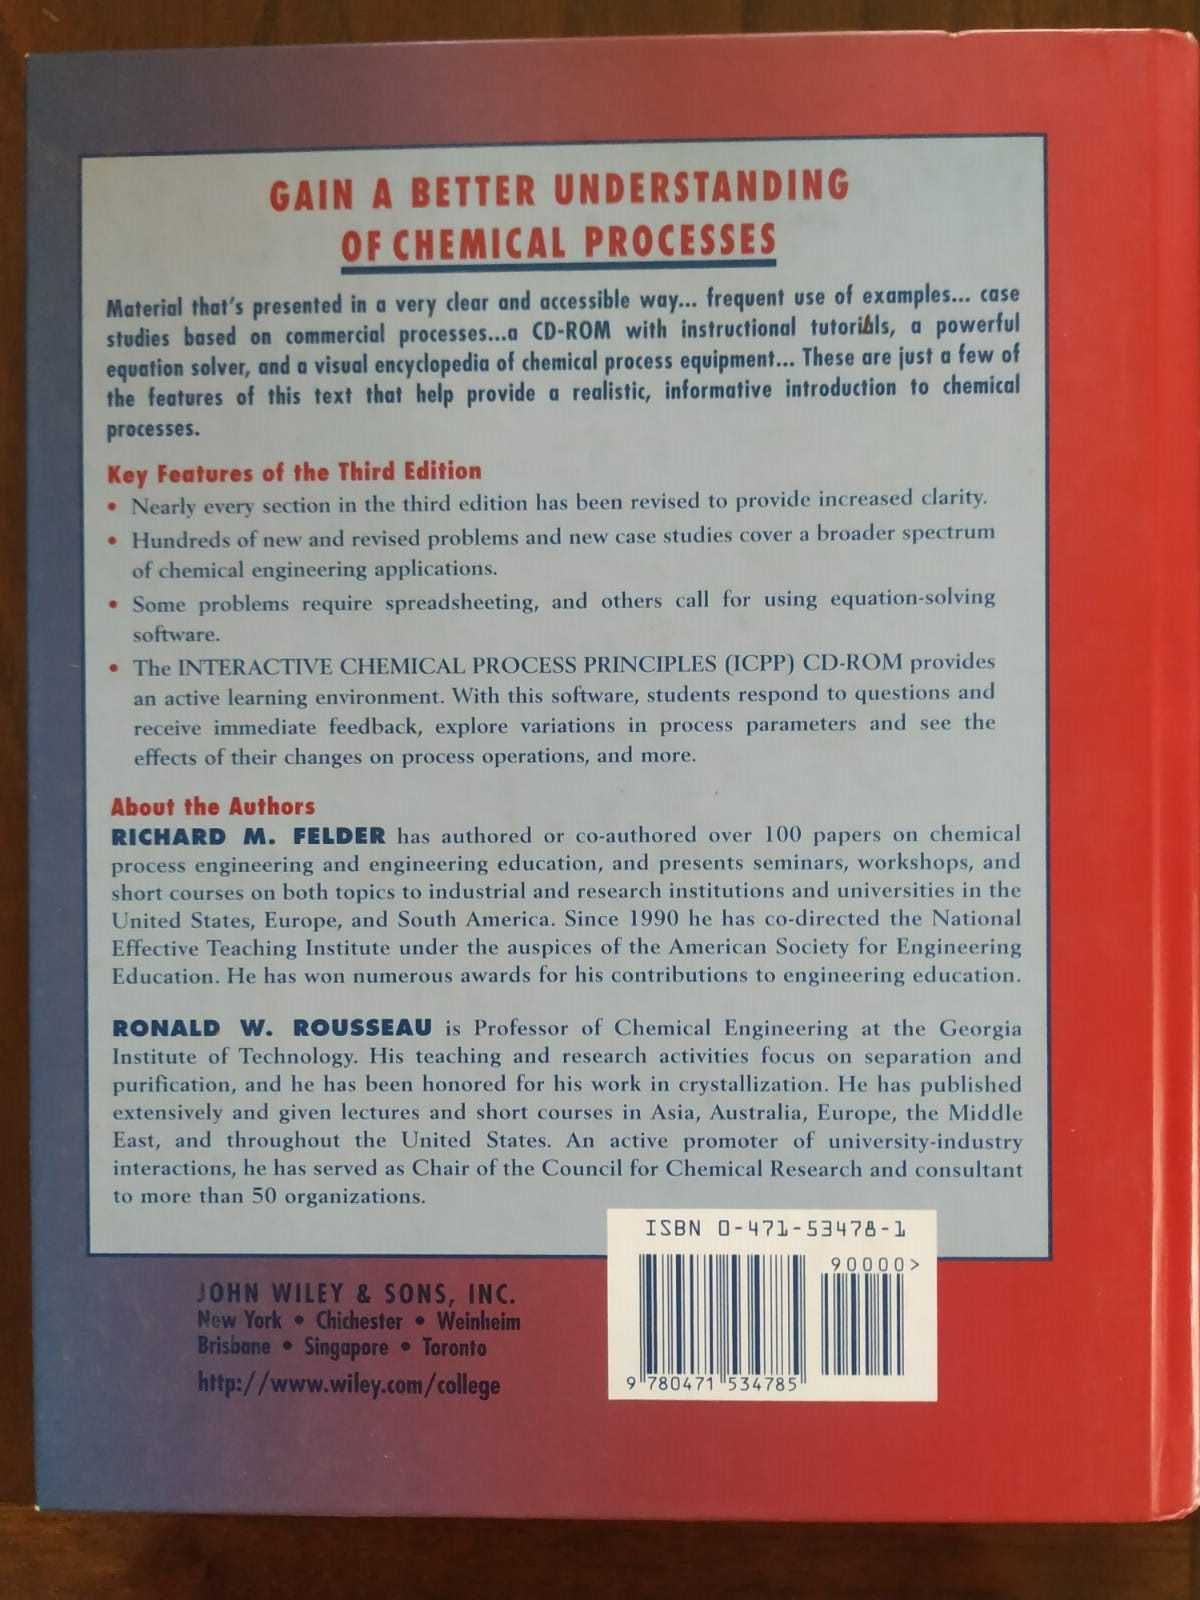 Elementary Principles of Chemical Processes